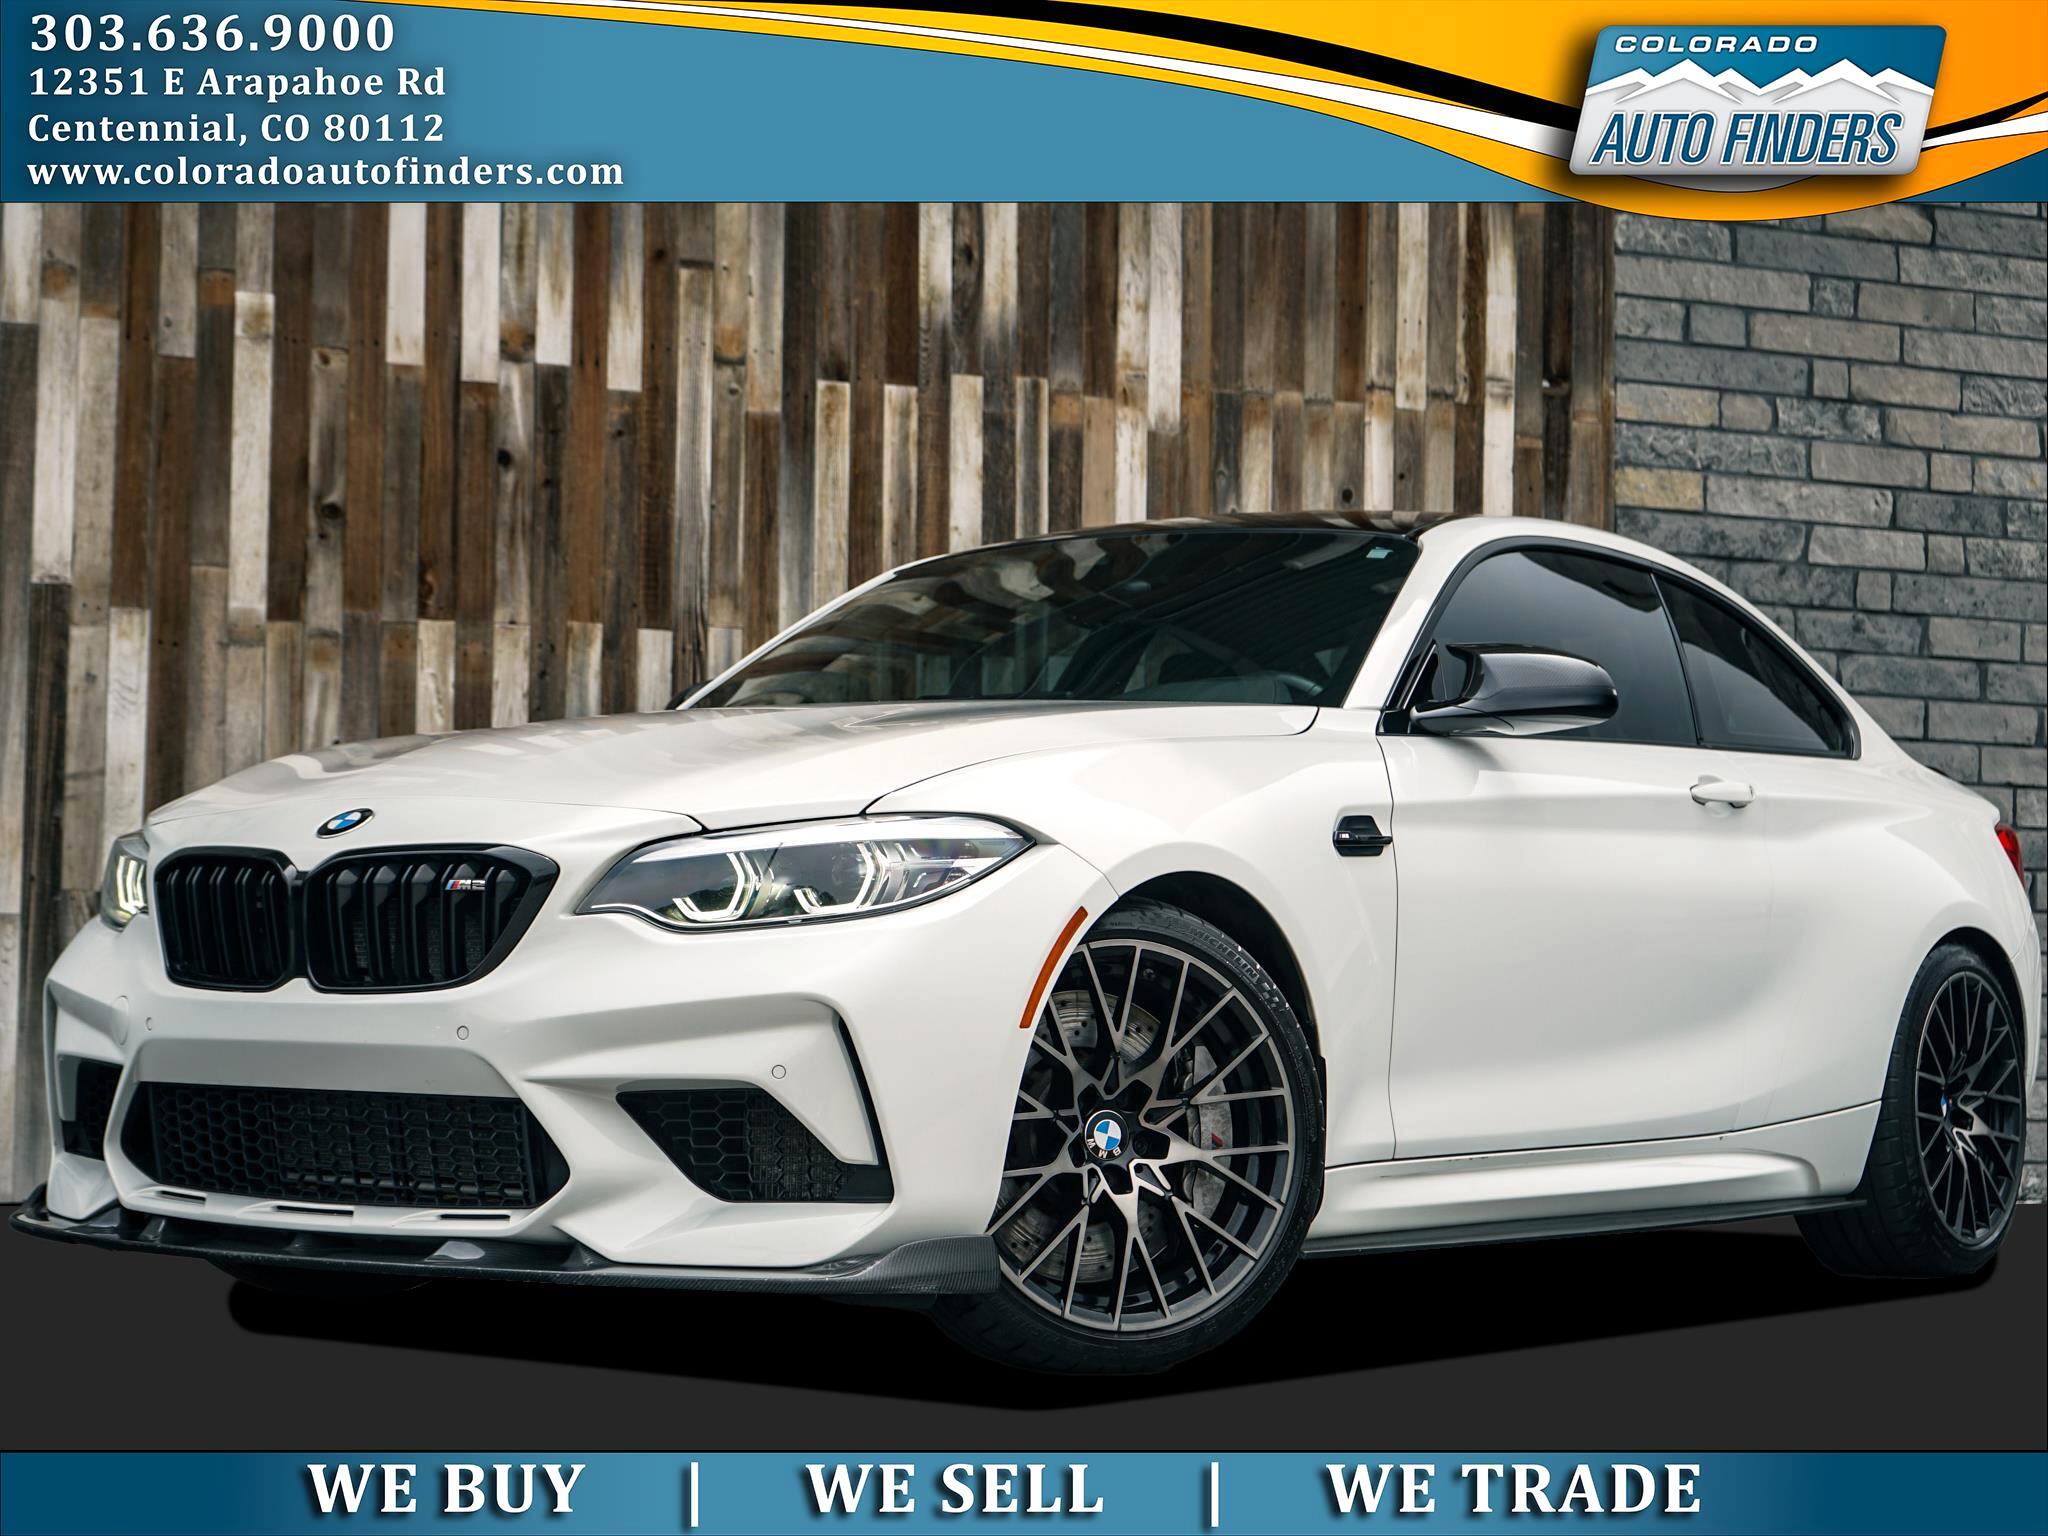 Used 2019 Bmw M2 Competition For Sale In Centennial Denver, Aurora Co 80112  Colorado Auto Finders